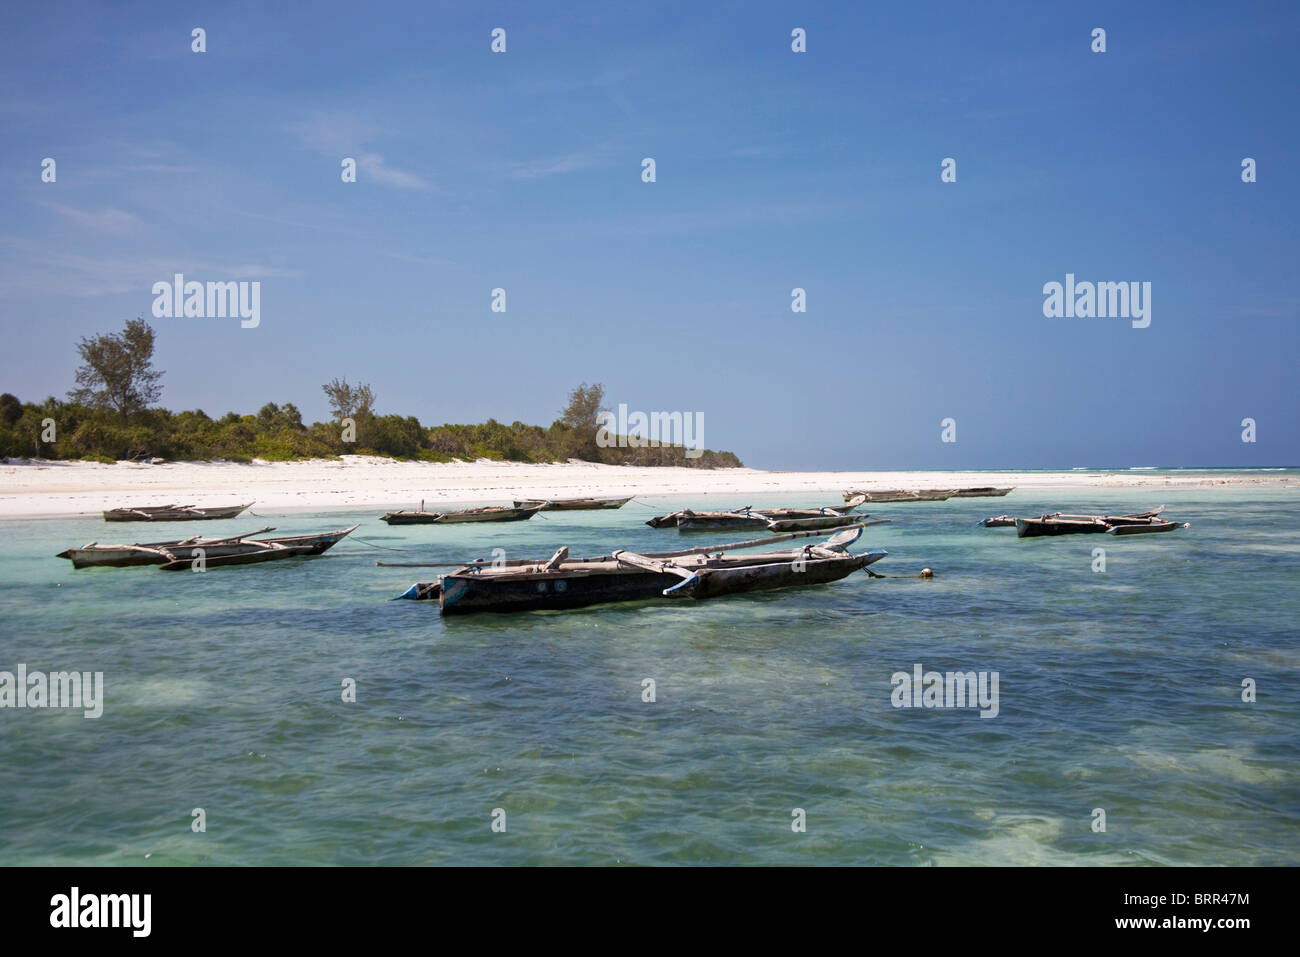 Beach scene with outrigger fishing boats moored in shallow water off Mnemba Island Stock Photo